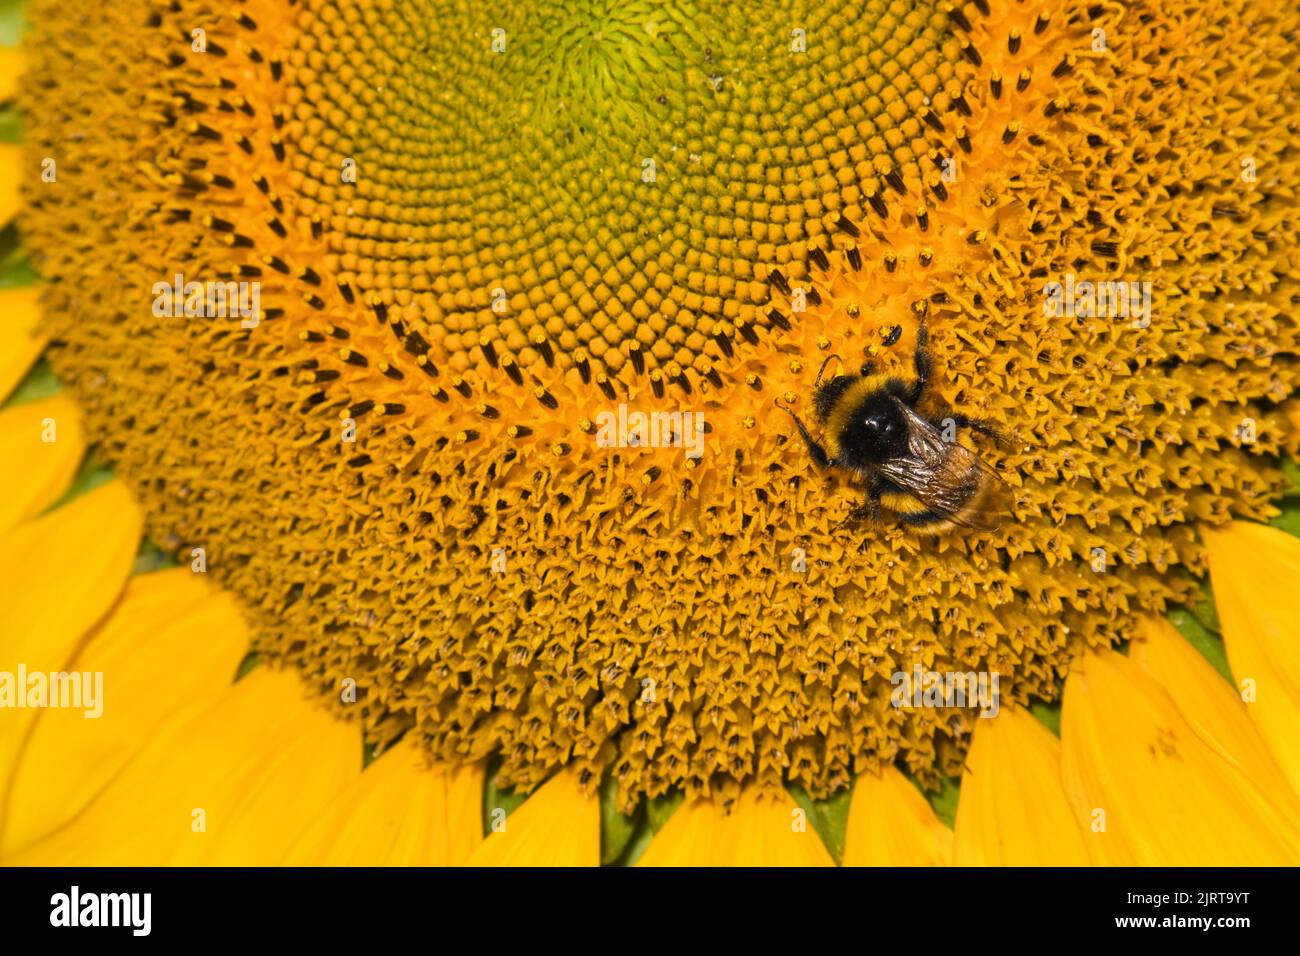 Bumblebee and sunflower at autumn Stock Photo